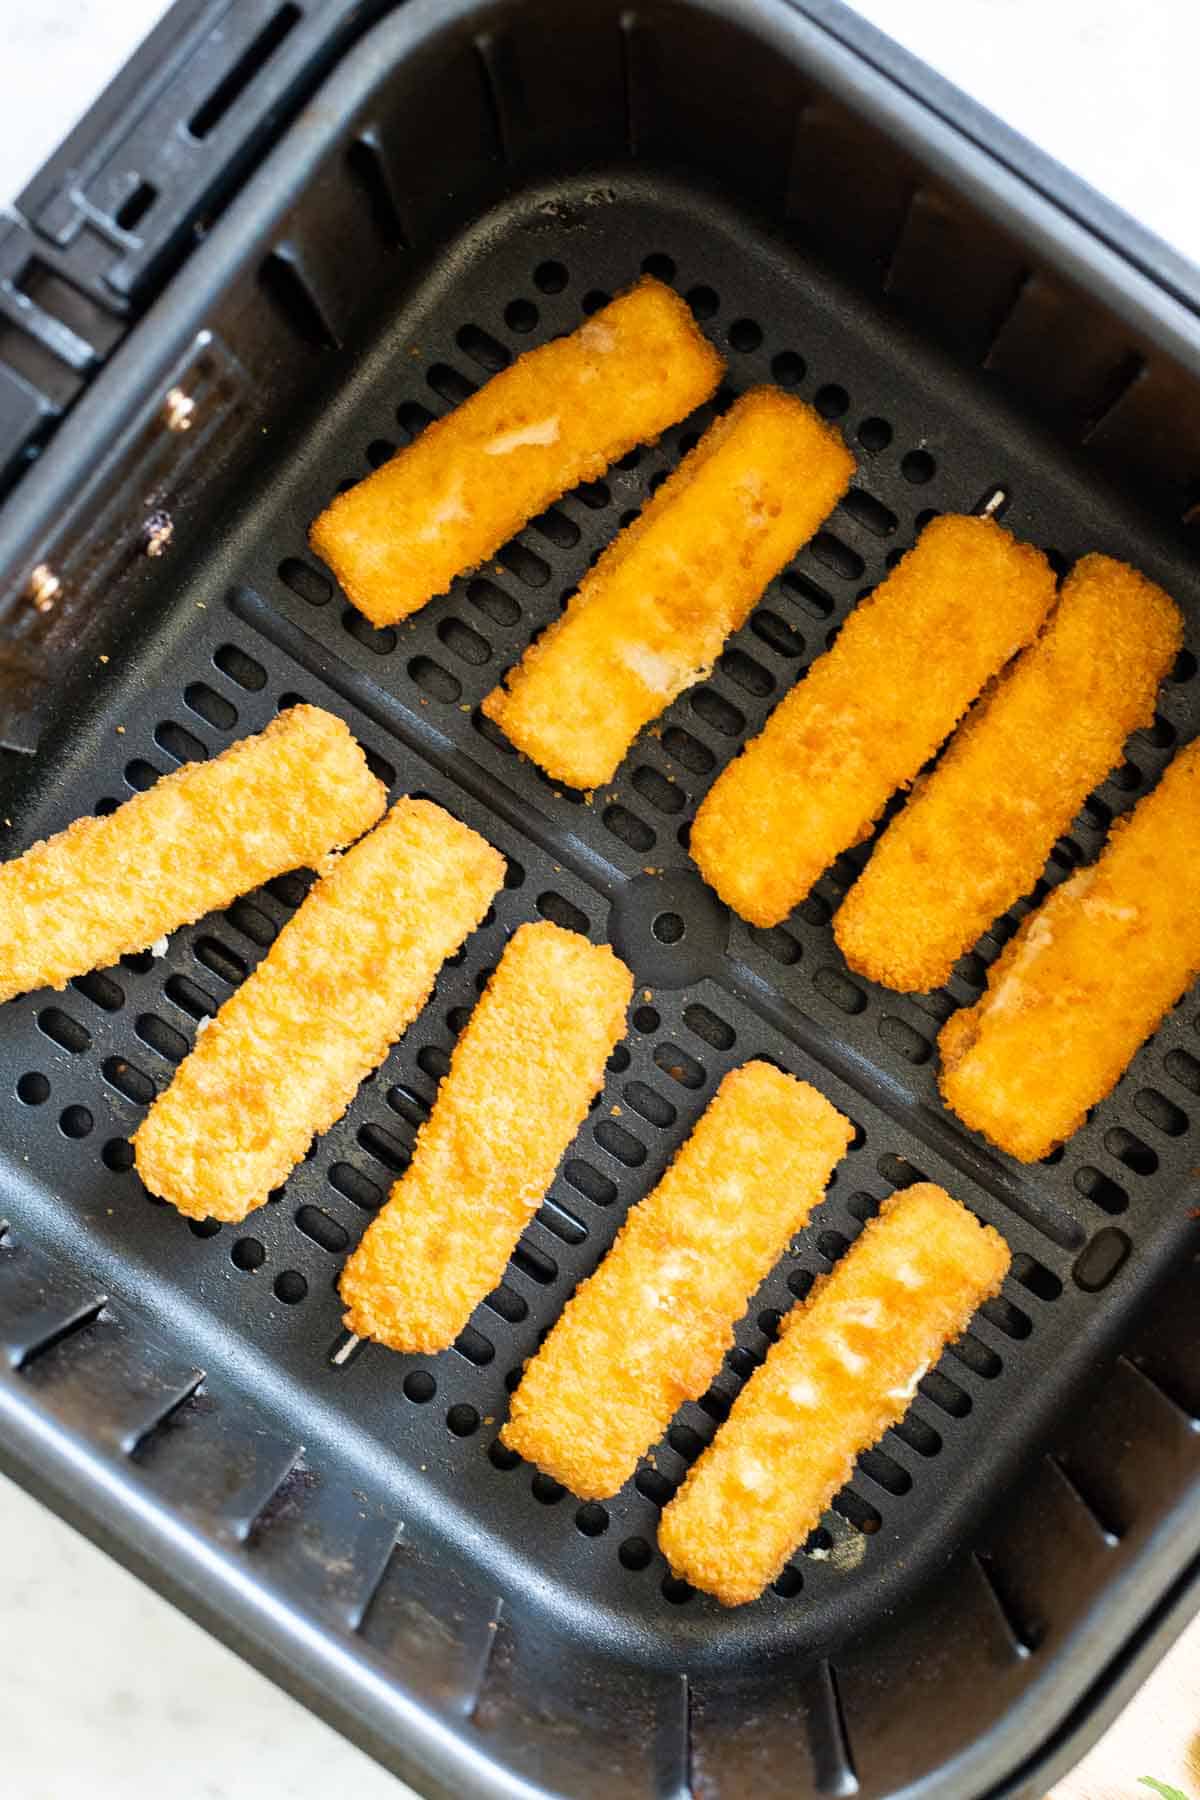 Cooked fish sticks in an air fryer basket.